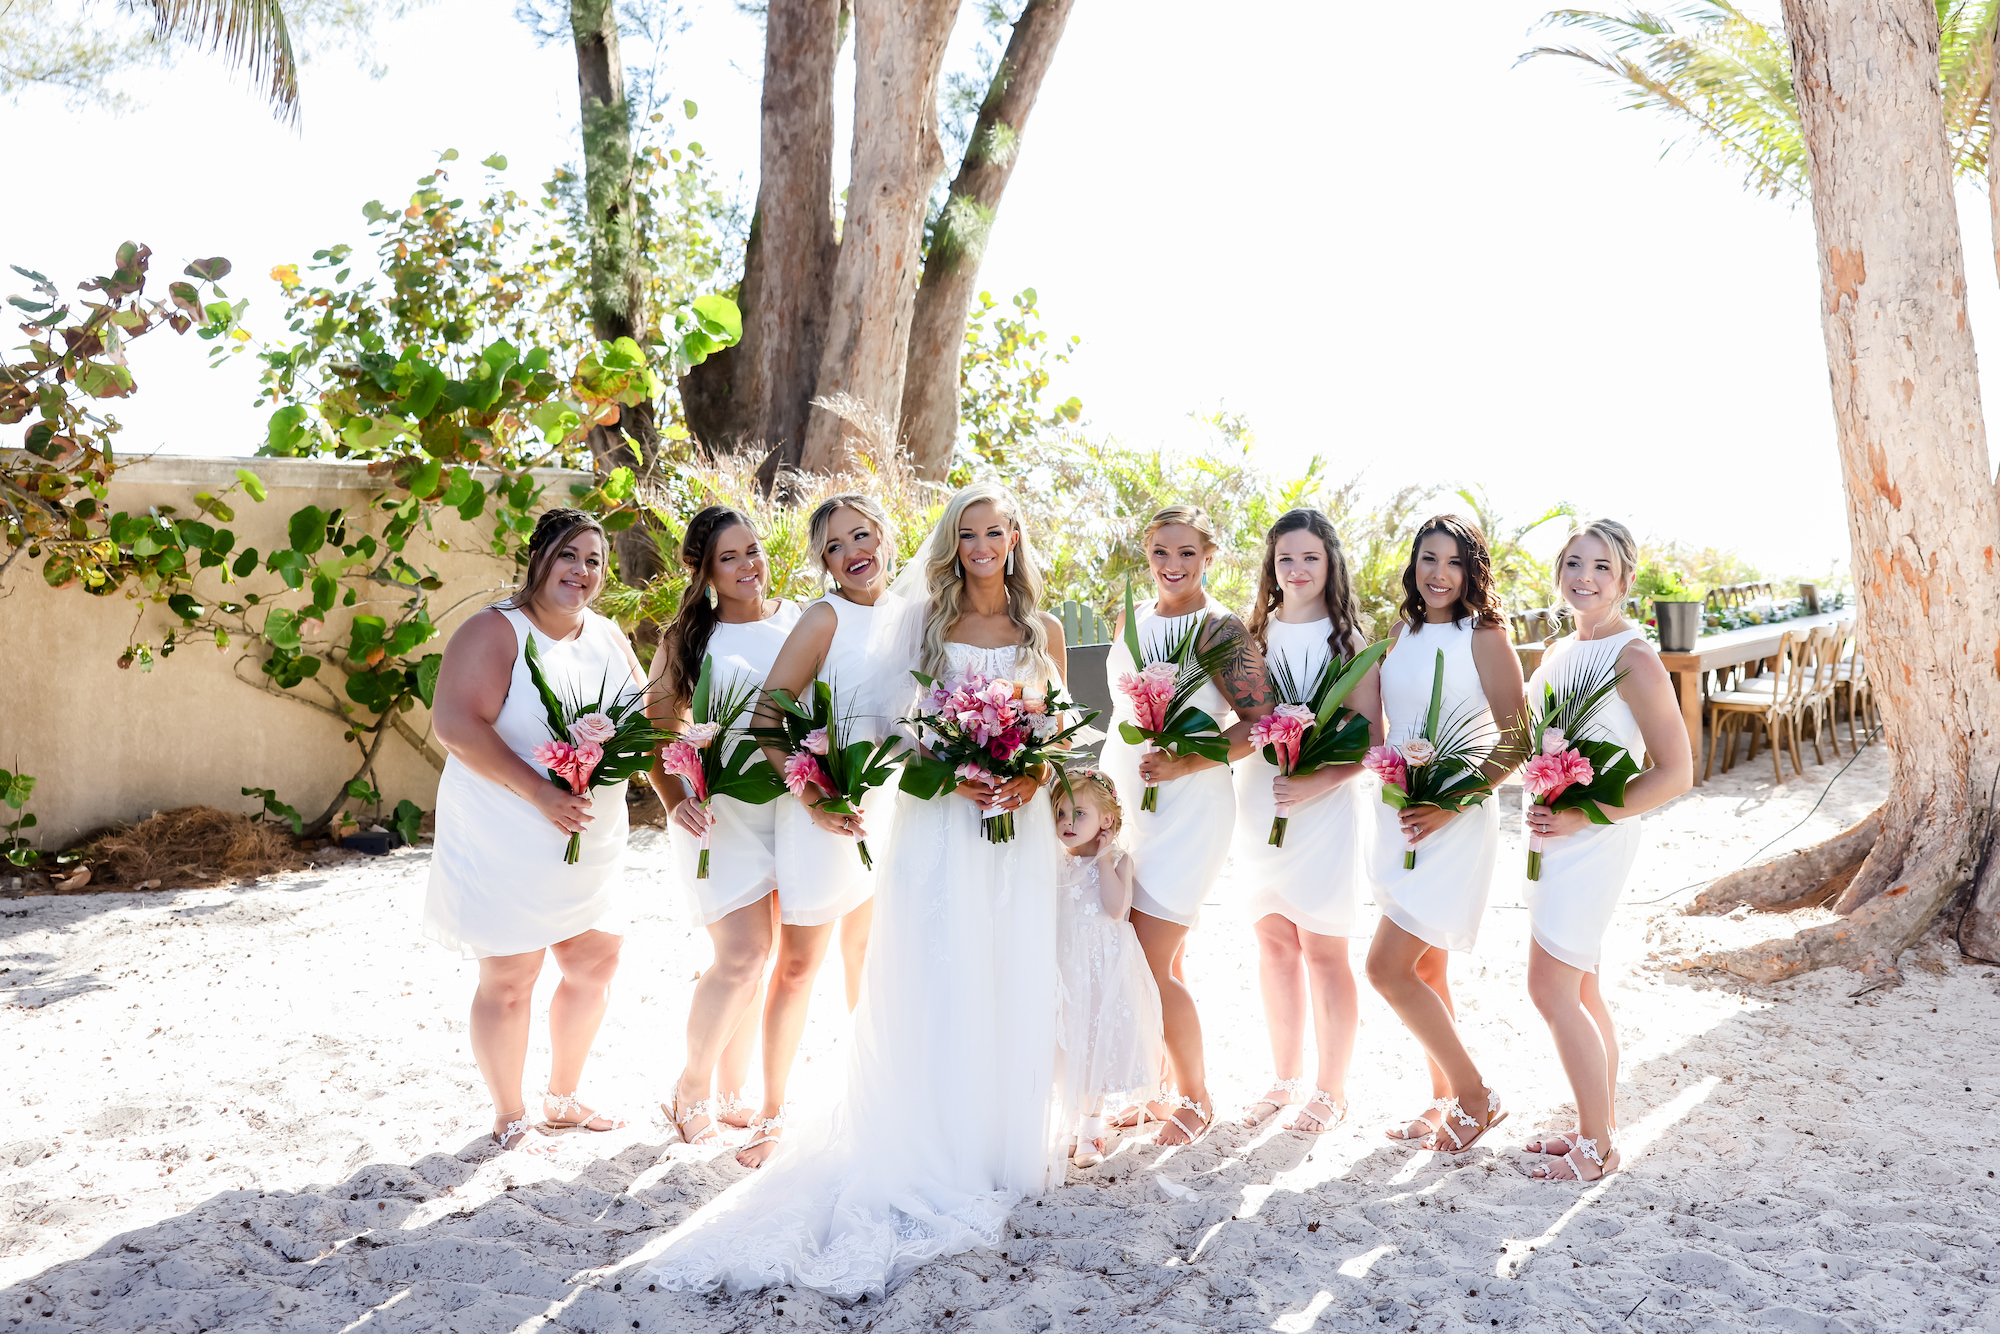 Beachy Knee Length Matching White Bridesmaids Dresses | Tropical Wedding Bouquets | St Pete Hair and Makeup Artist Adore Bridal